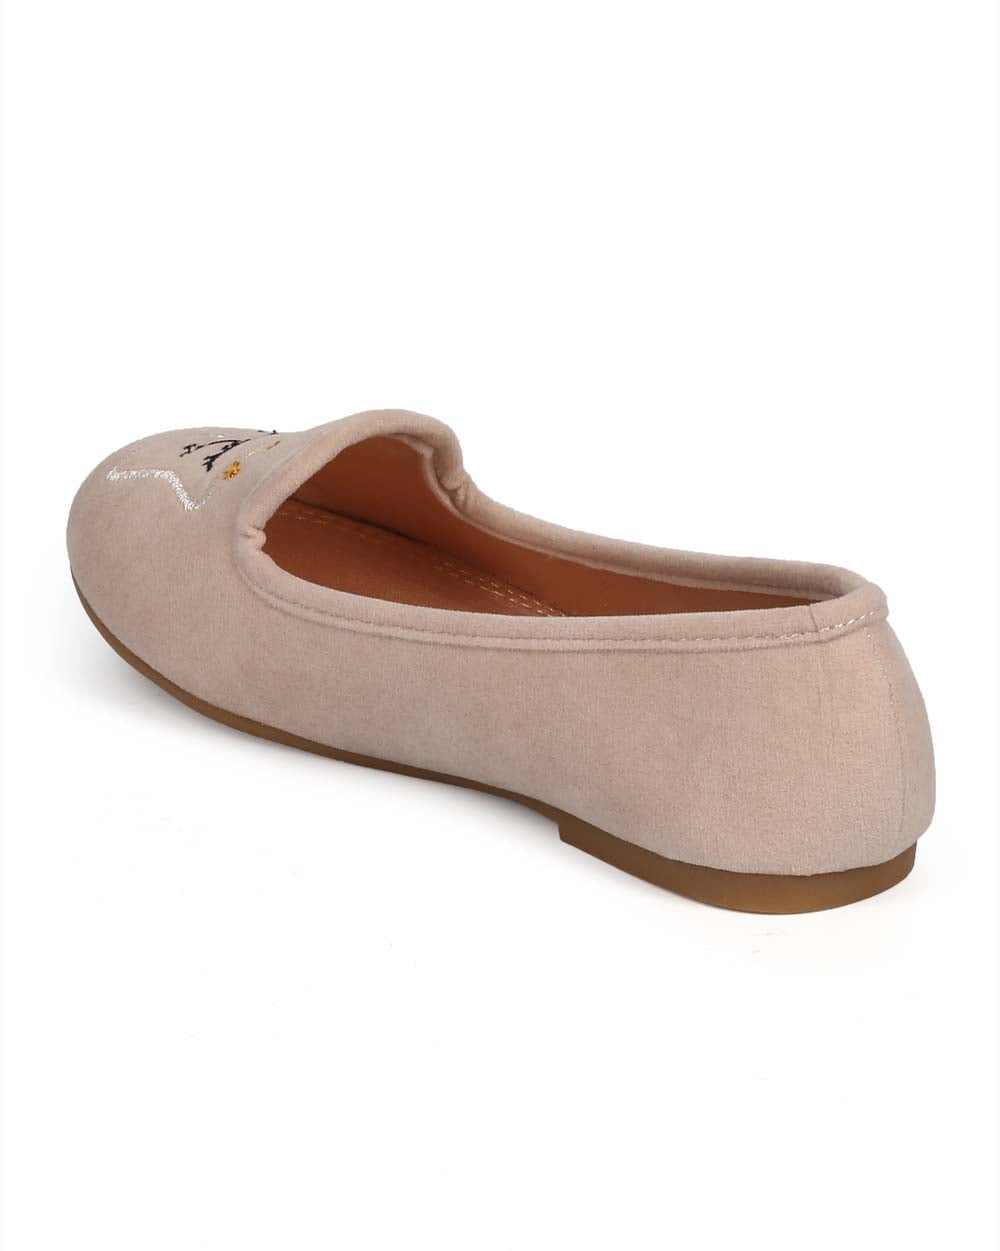 New Girl DI01 Same Suede Cloud Character Round Toe Albert Slip On Loafer 11-4